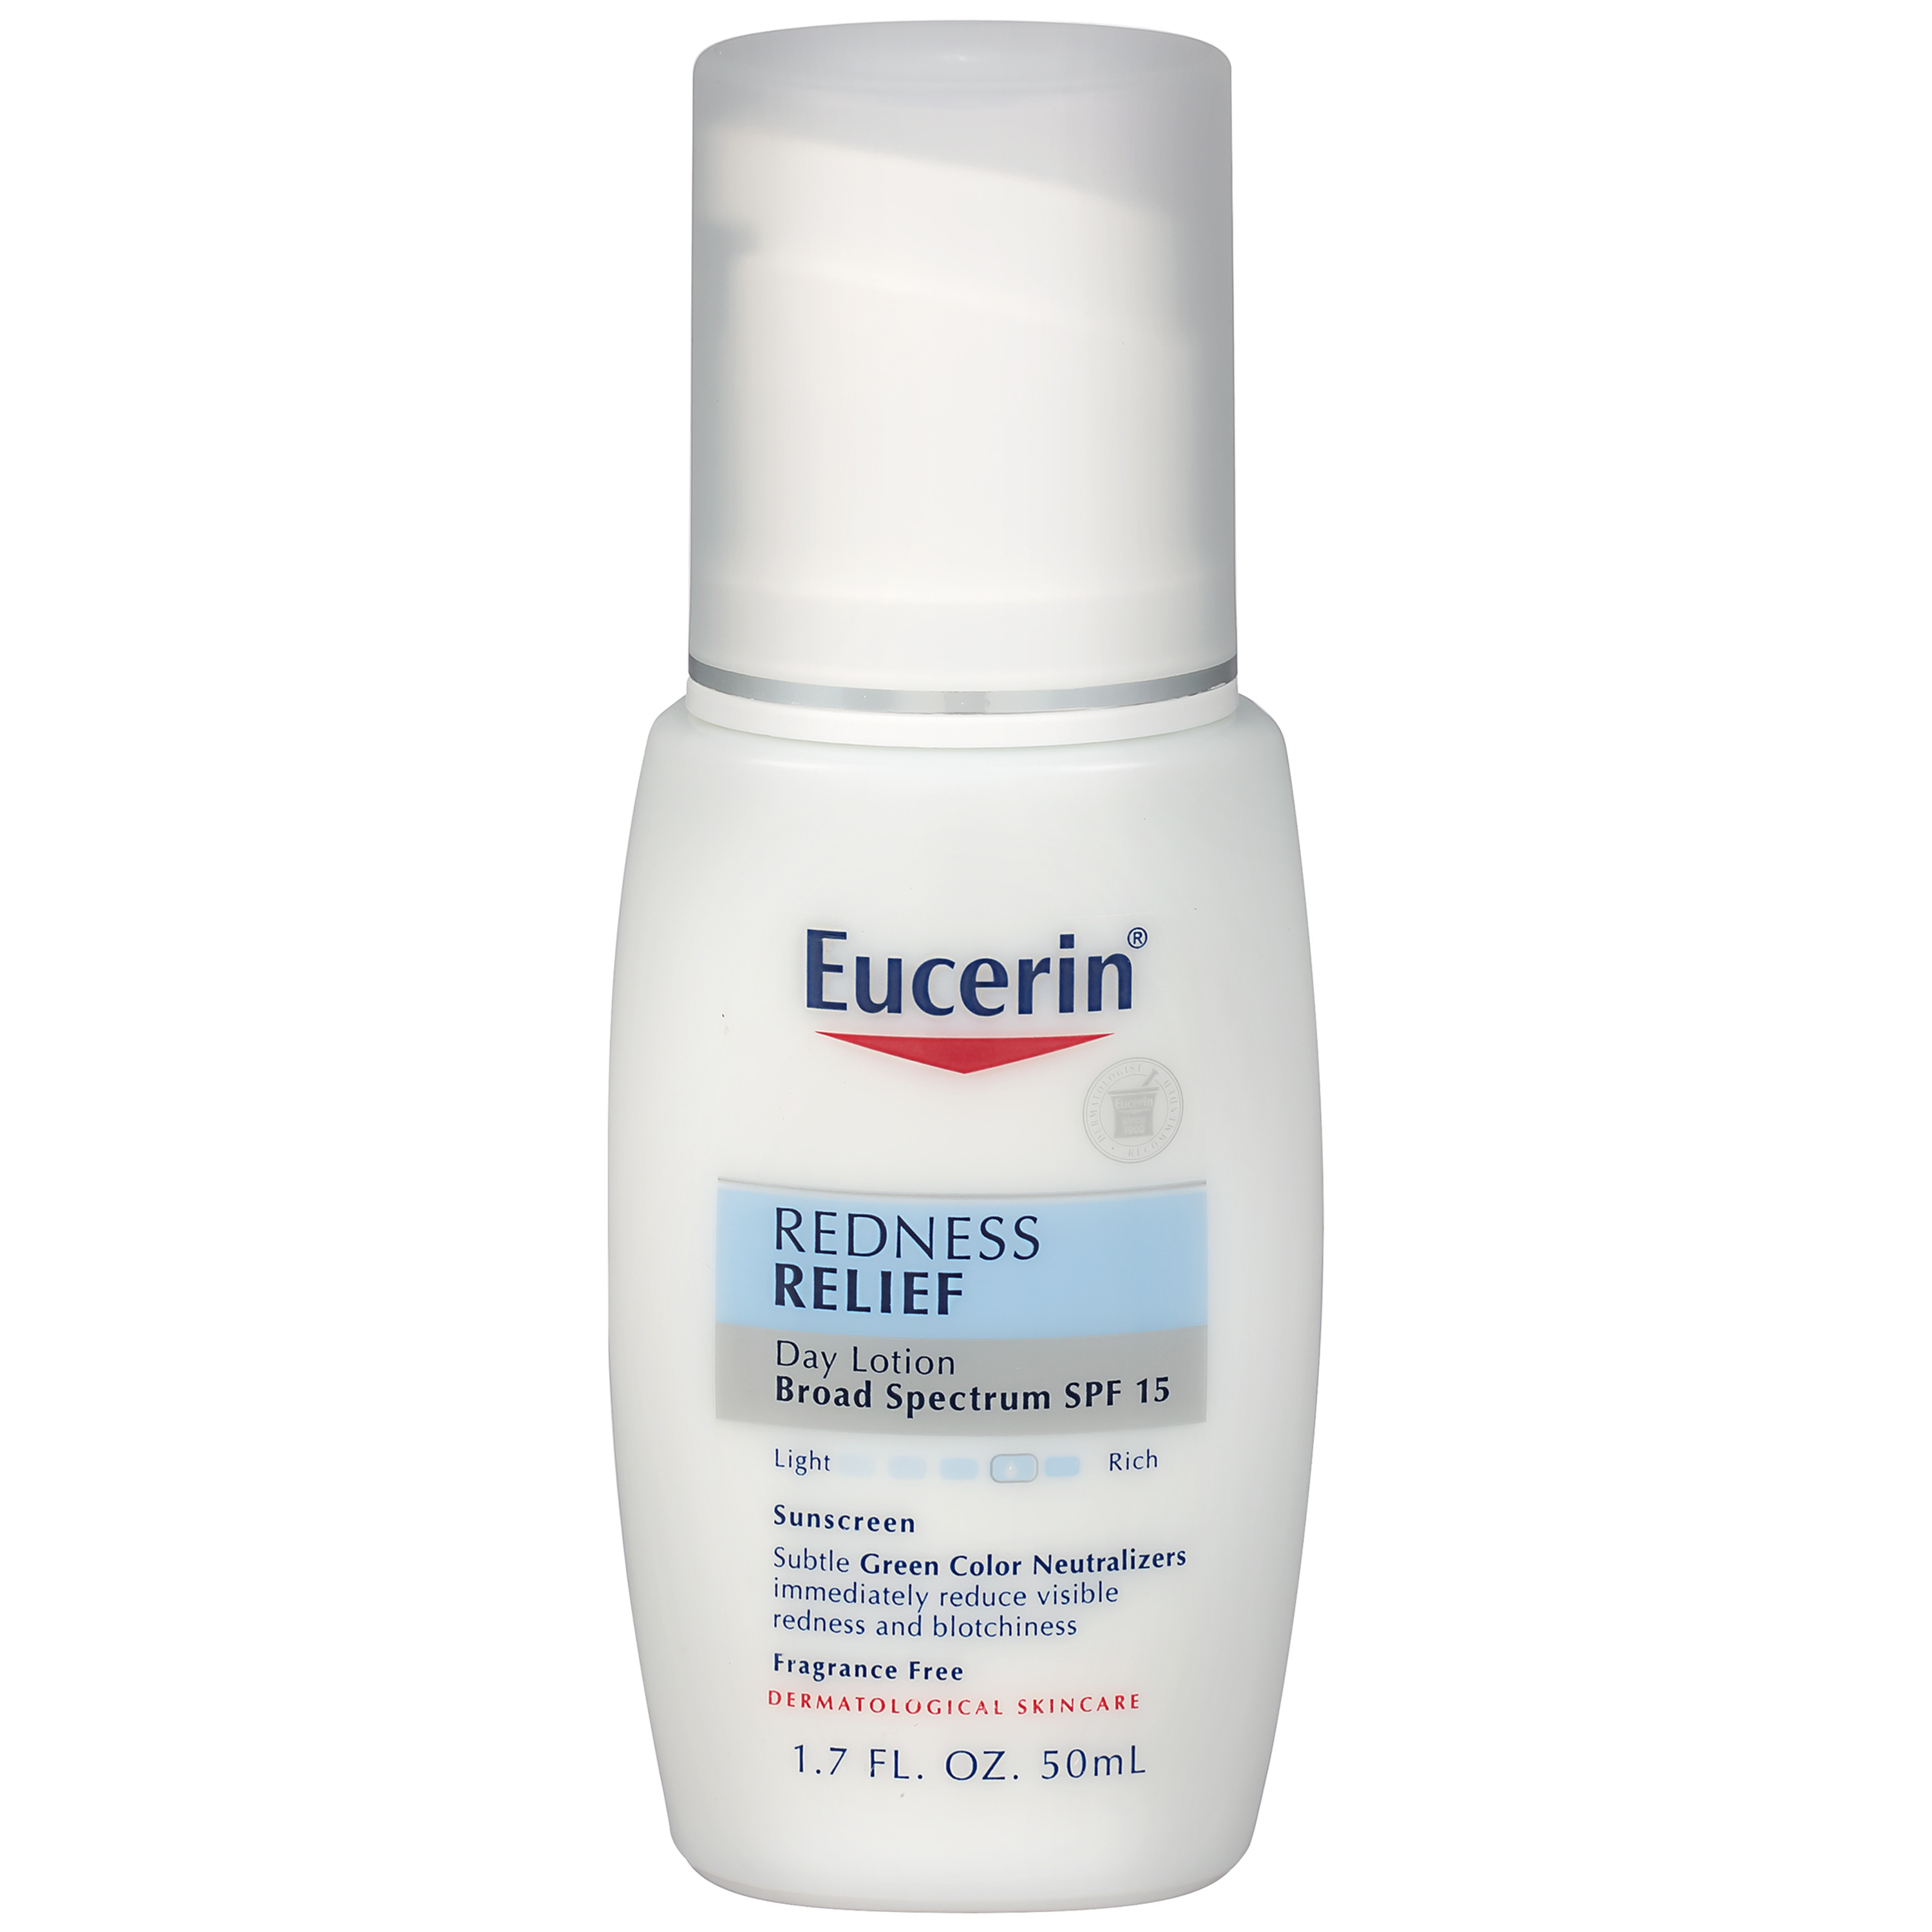 Eucerin  Redness Relief Day Lotion Broad Spectrum SPF 15, 1.7 Fl Oz - image 2 of 10